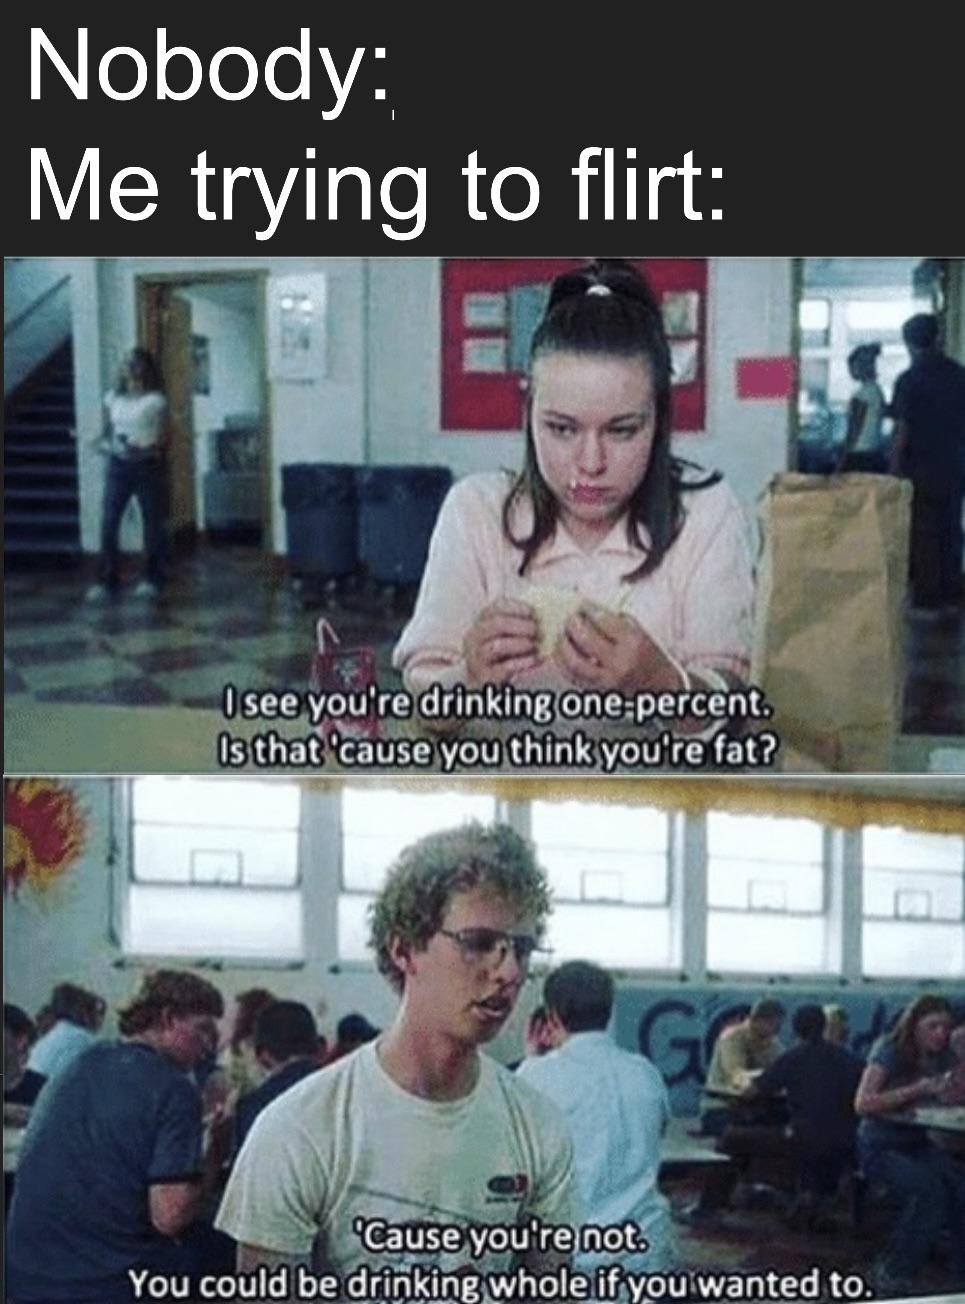 flirting skills meme - Nobody Me trying to flirt I see you're drinking one percent. Is that 'cause you think you're fat? 'Cause you're not. You could be drinking whole if you wanted to.